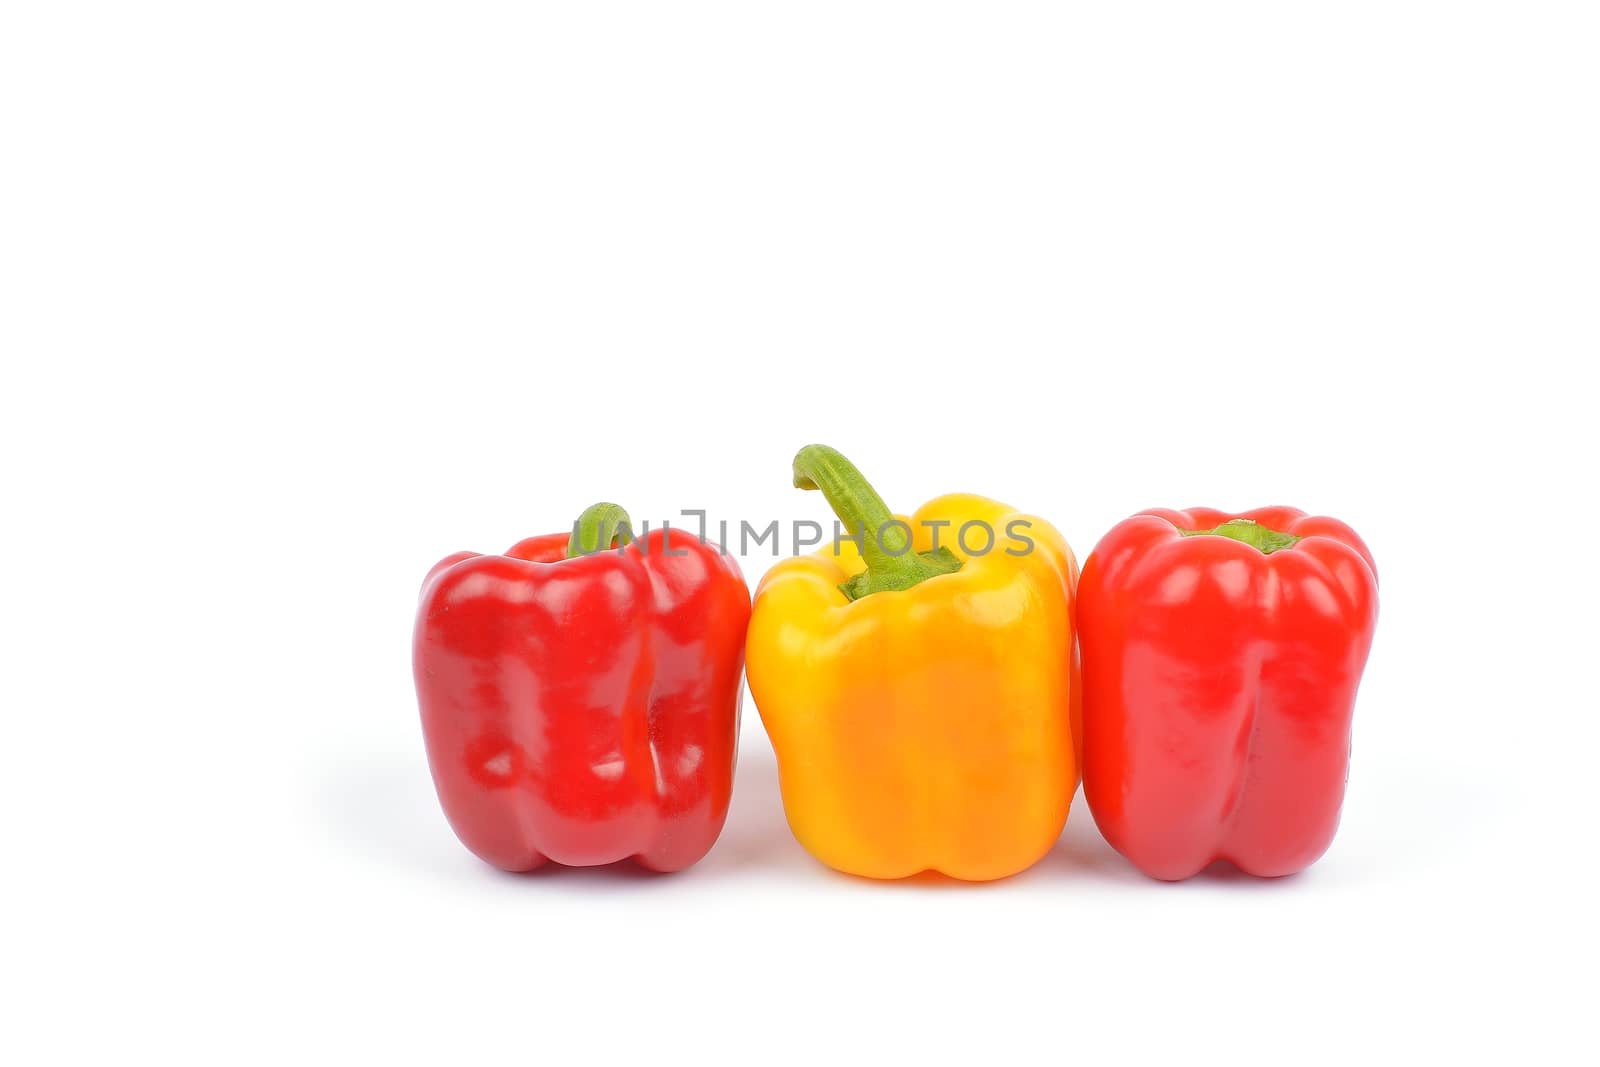 peppers or capsicum on white background by constantinhurghea